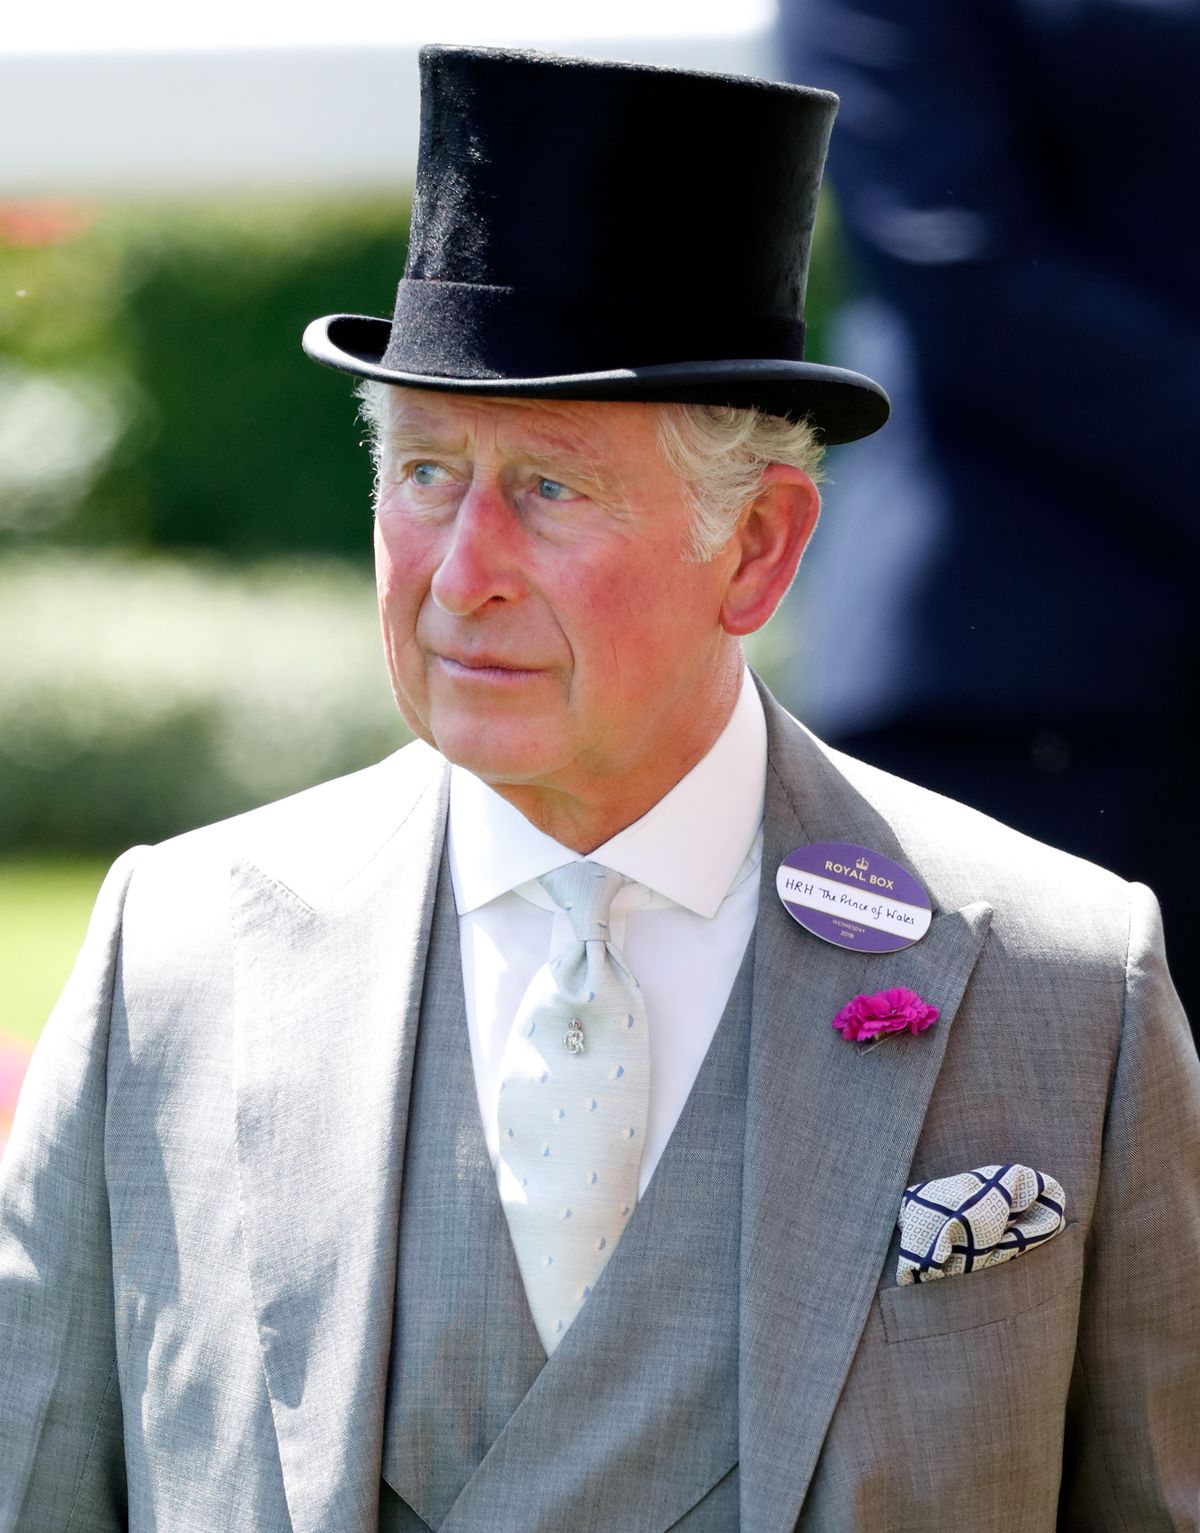 Prince Charles at day 2 of Royal Ascot at Ascot Racecourse on June 20, 2018 | Photo: Getty Images